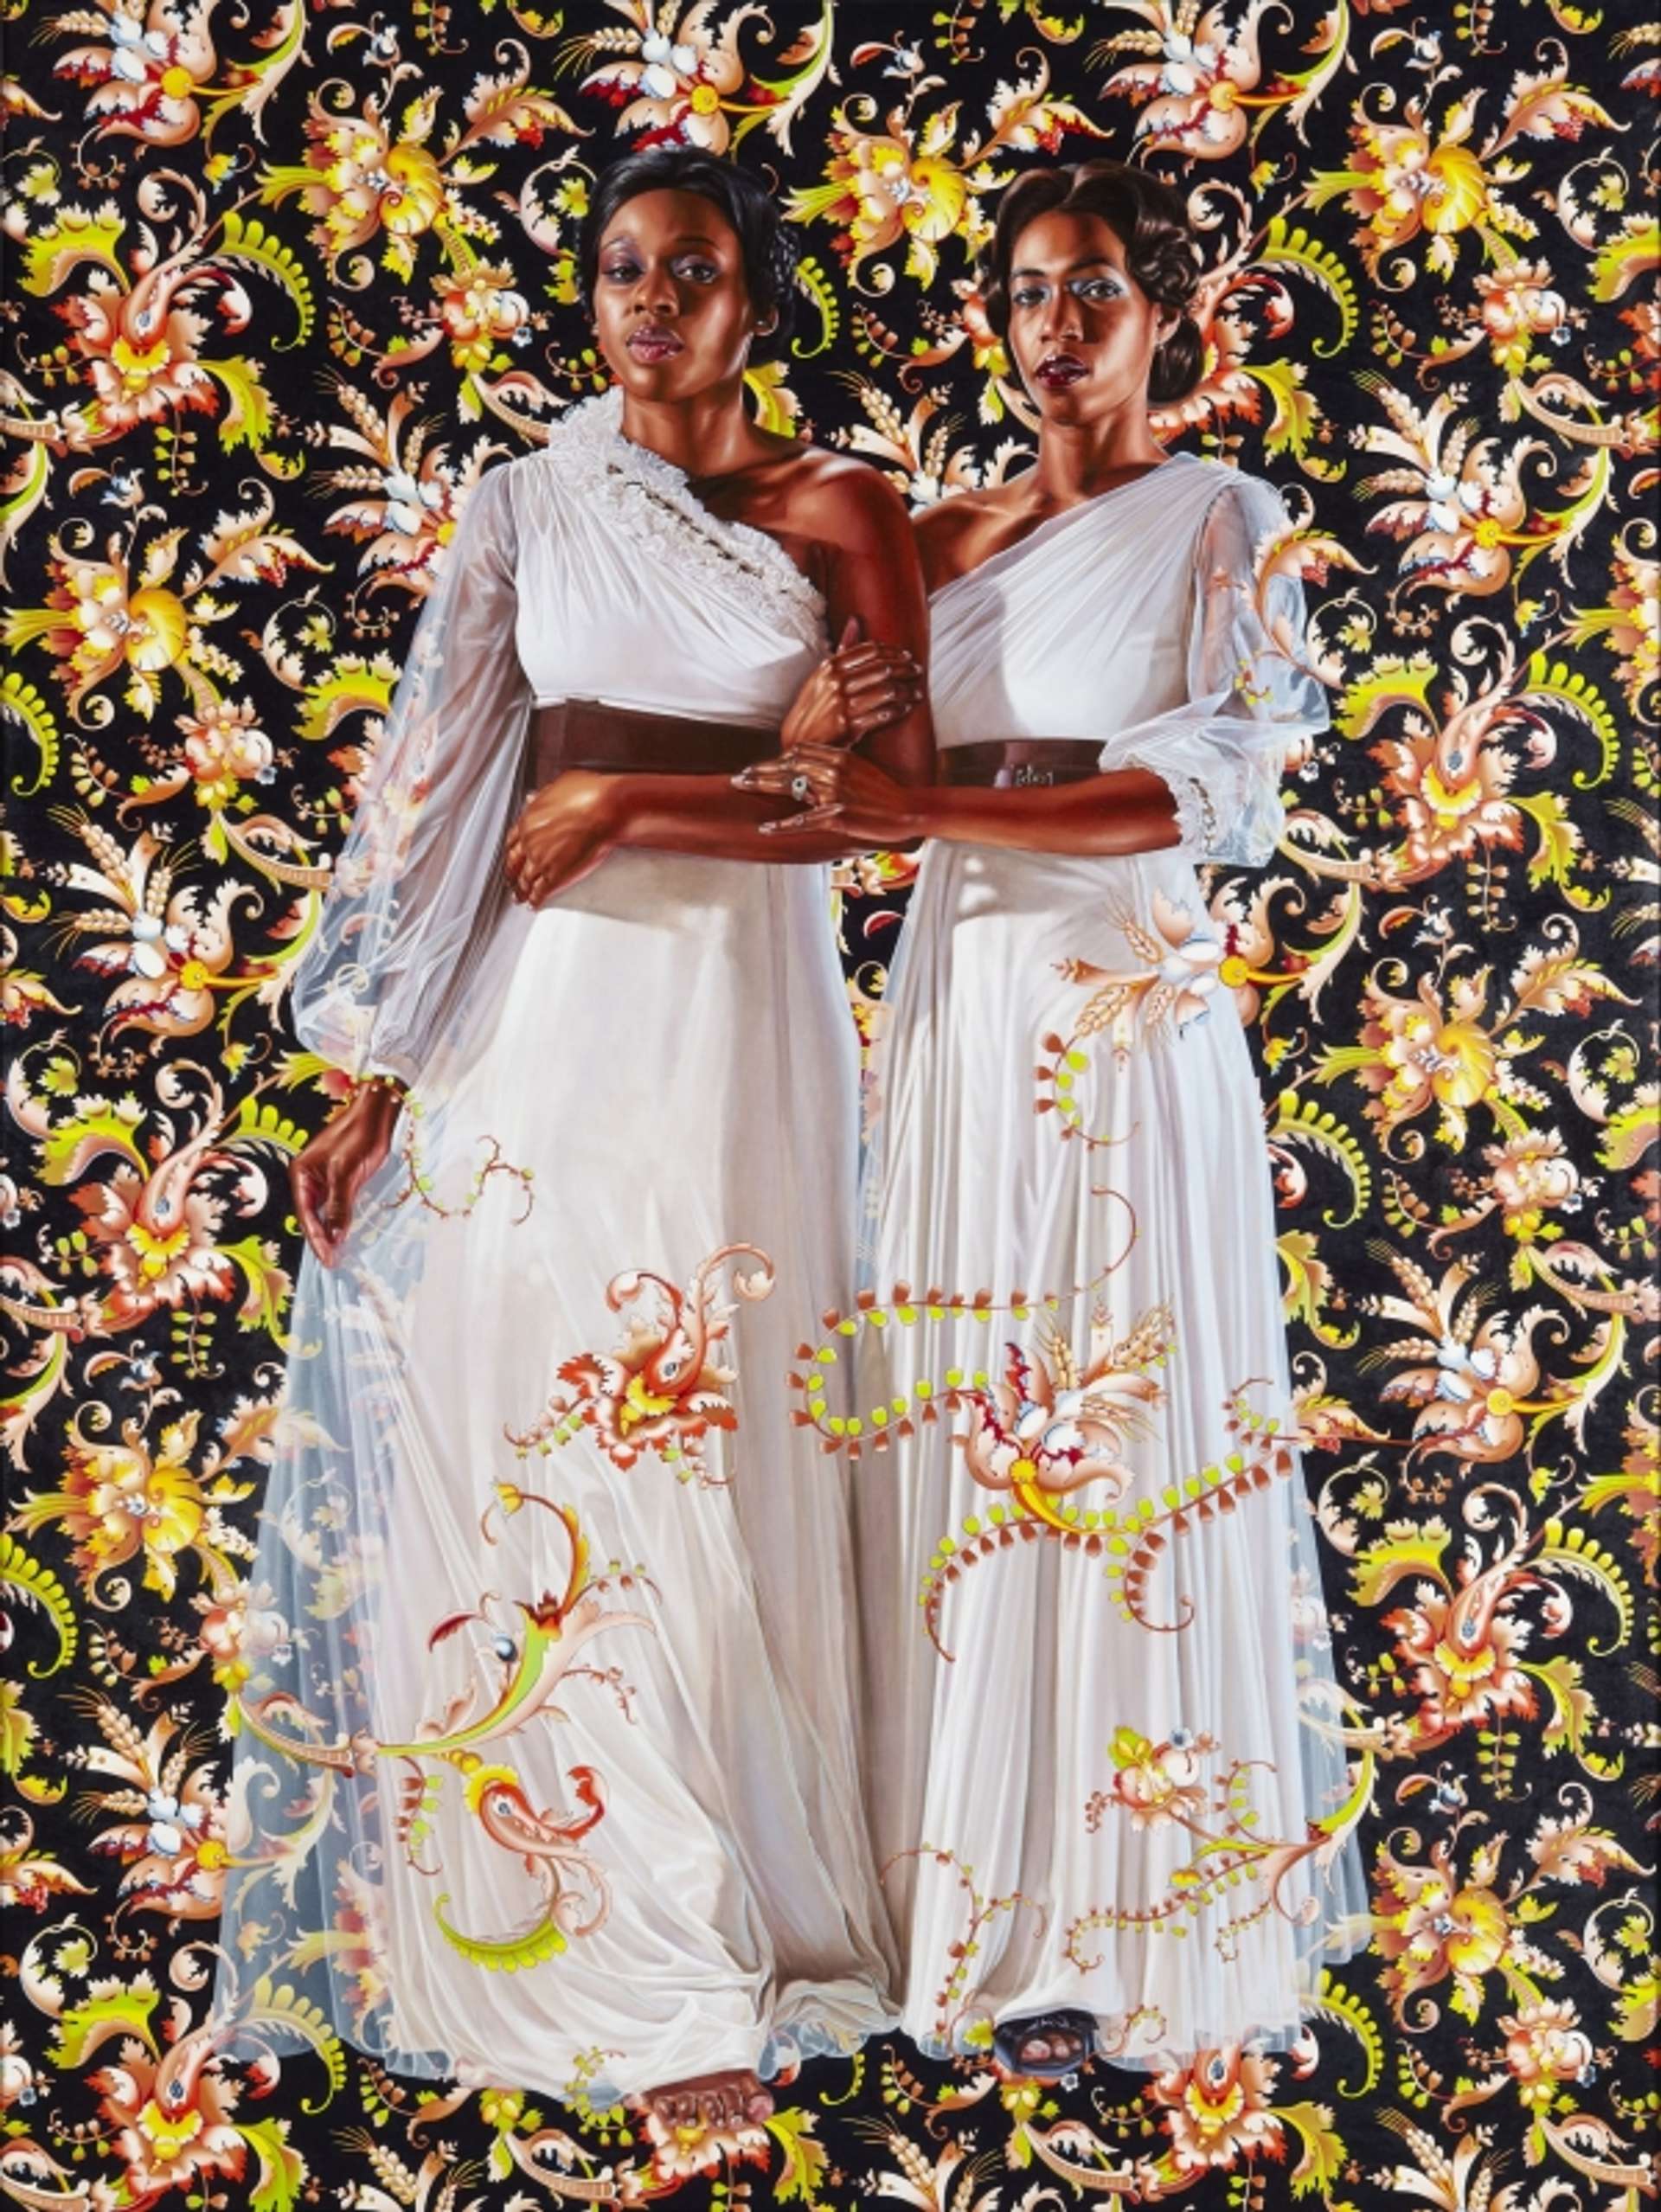 Kehinde Wiley’s The Two Sisters. Two black women standing next to each other, interlocking arms. They are dressed in long white gowns against a black background with floral arrangements.